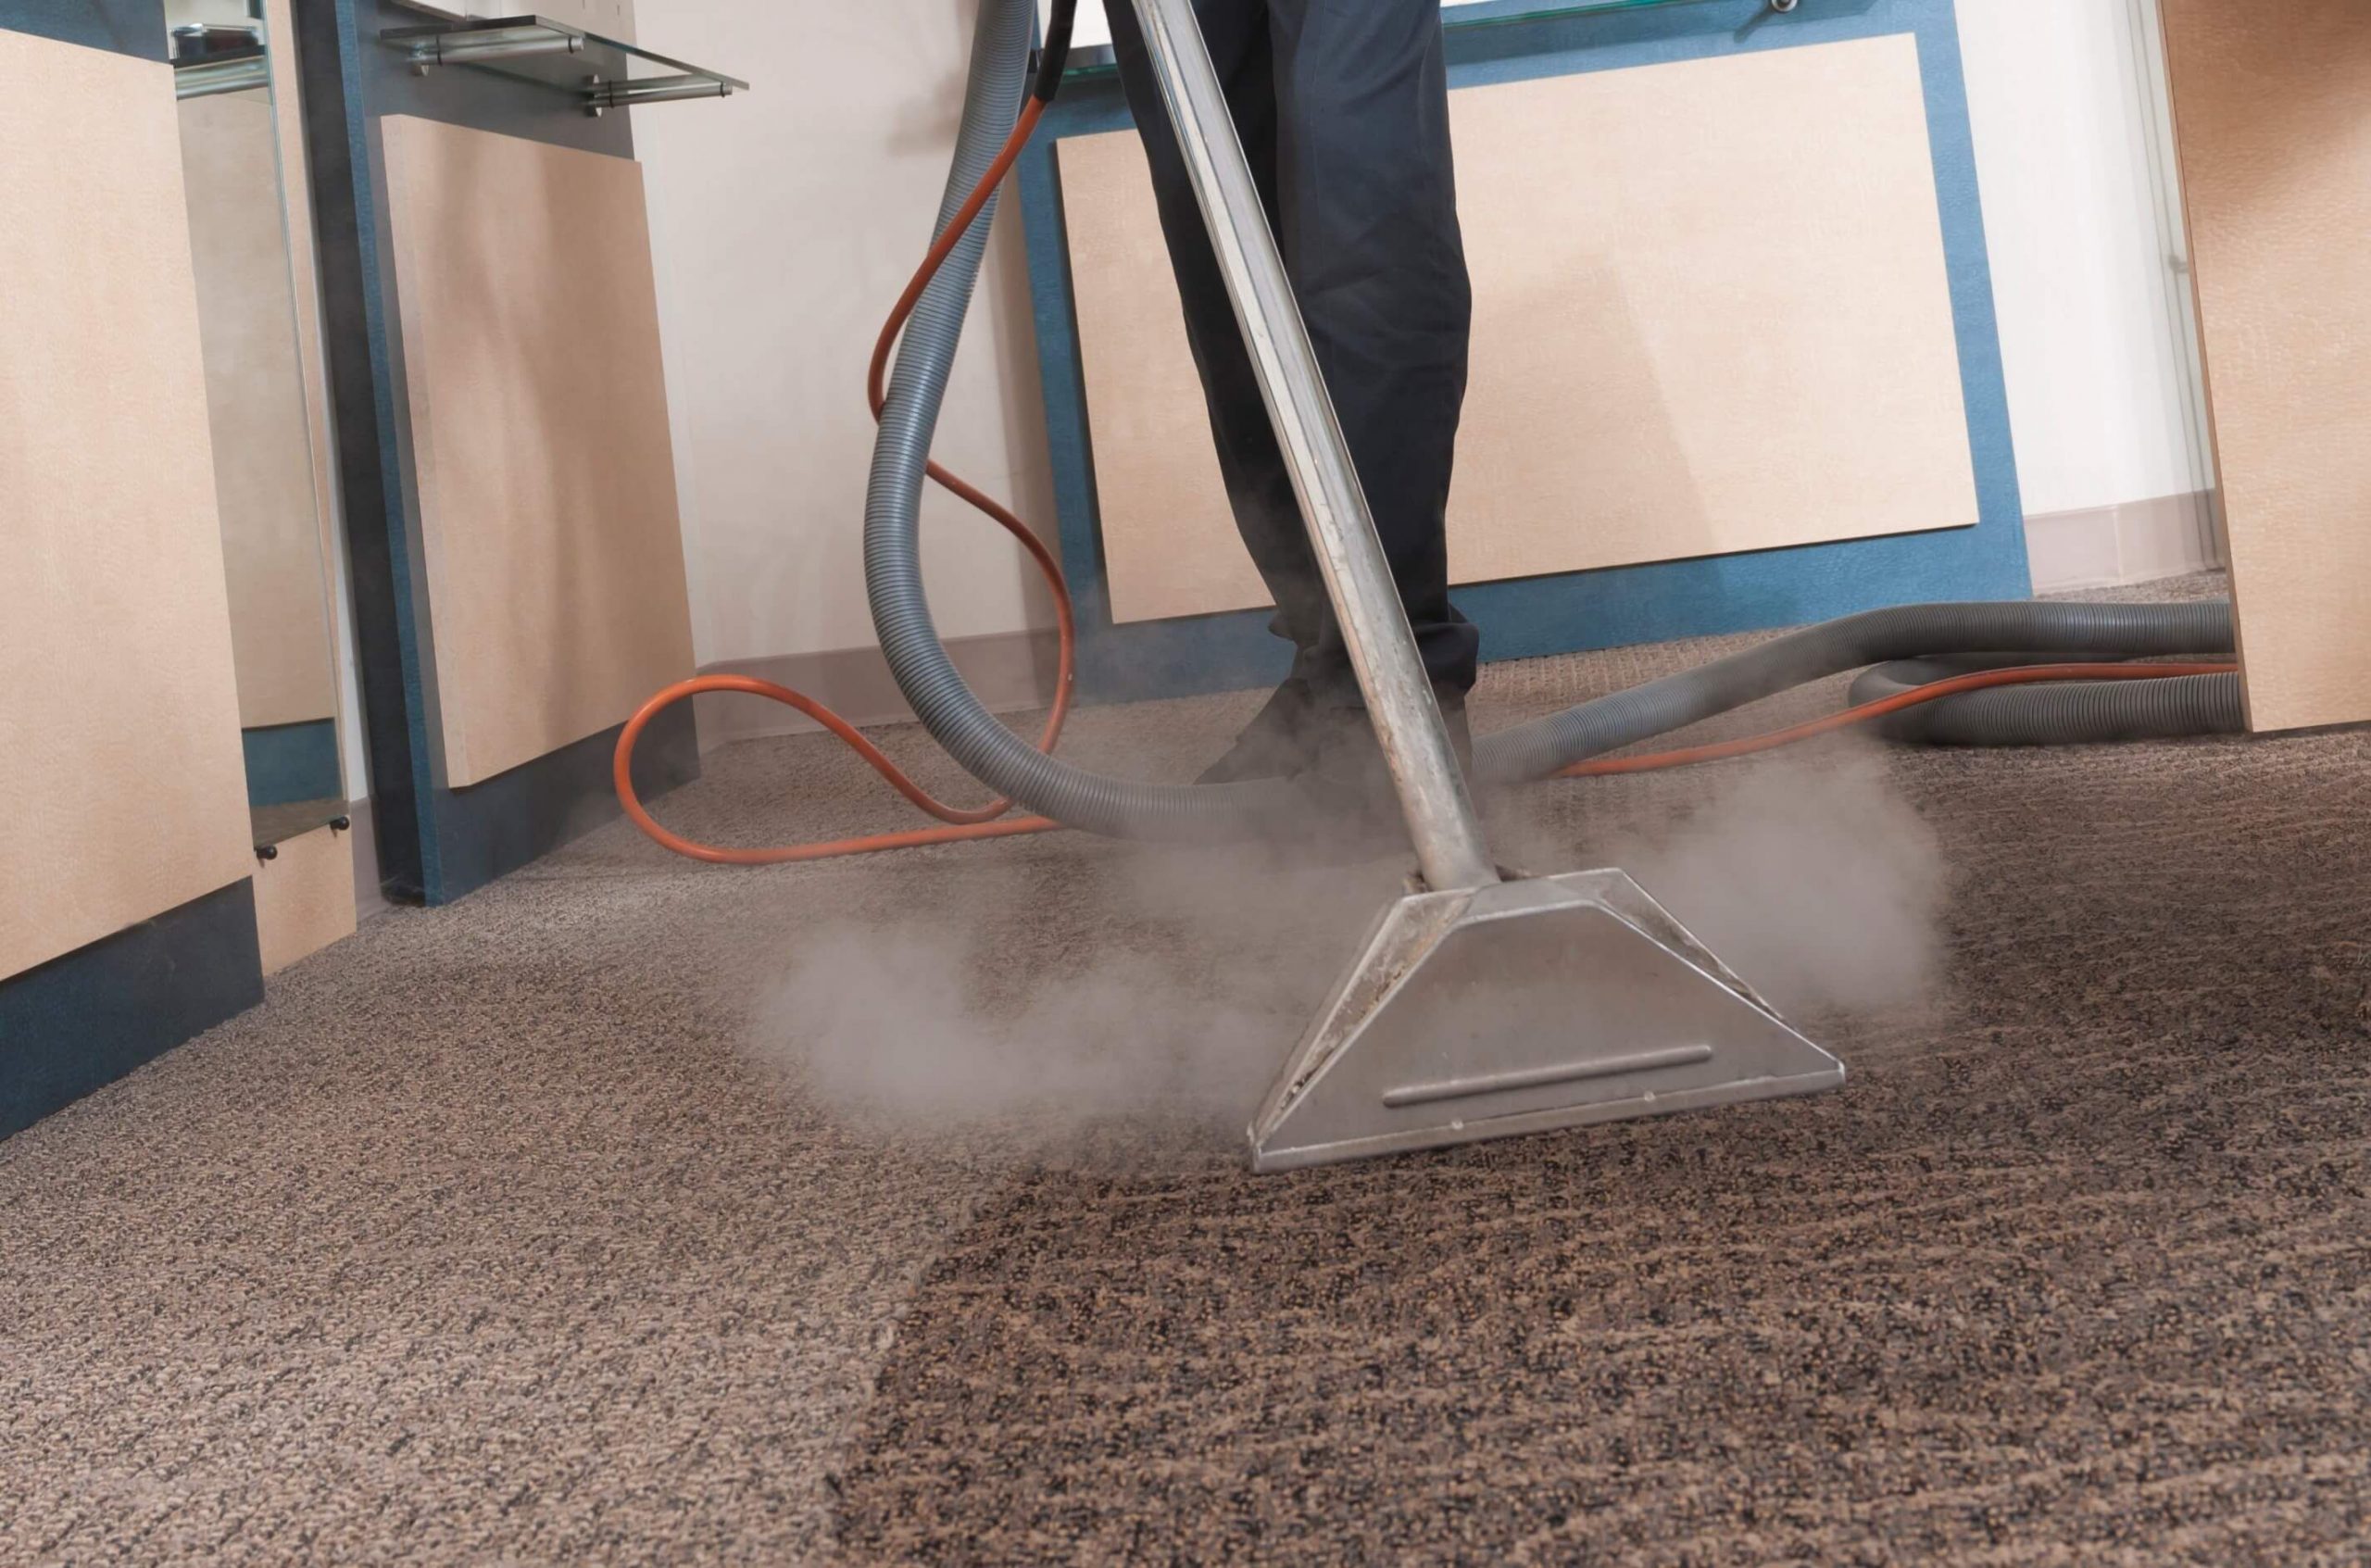  Carpet Cleaning Merrylands | Affordable Carpet Cleaning Services